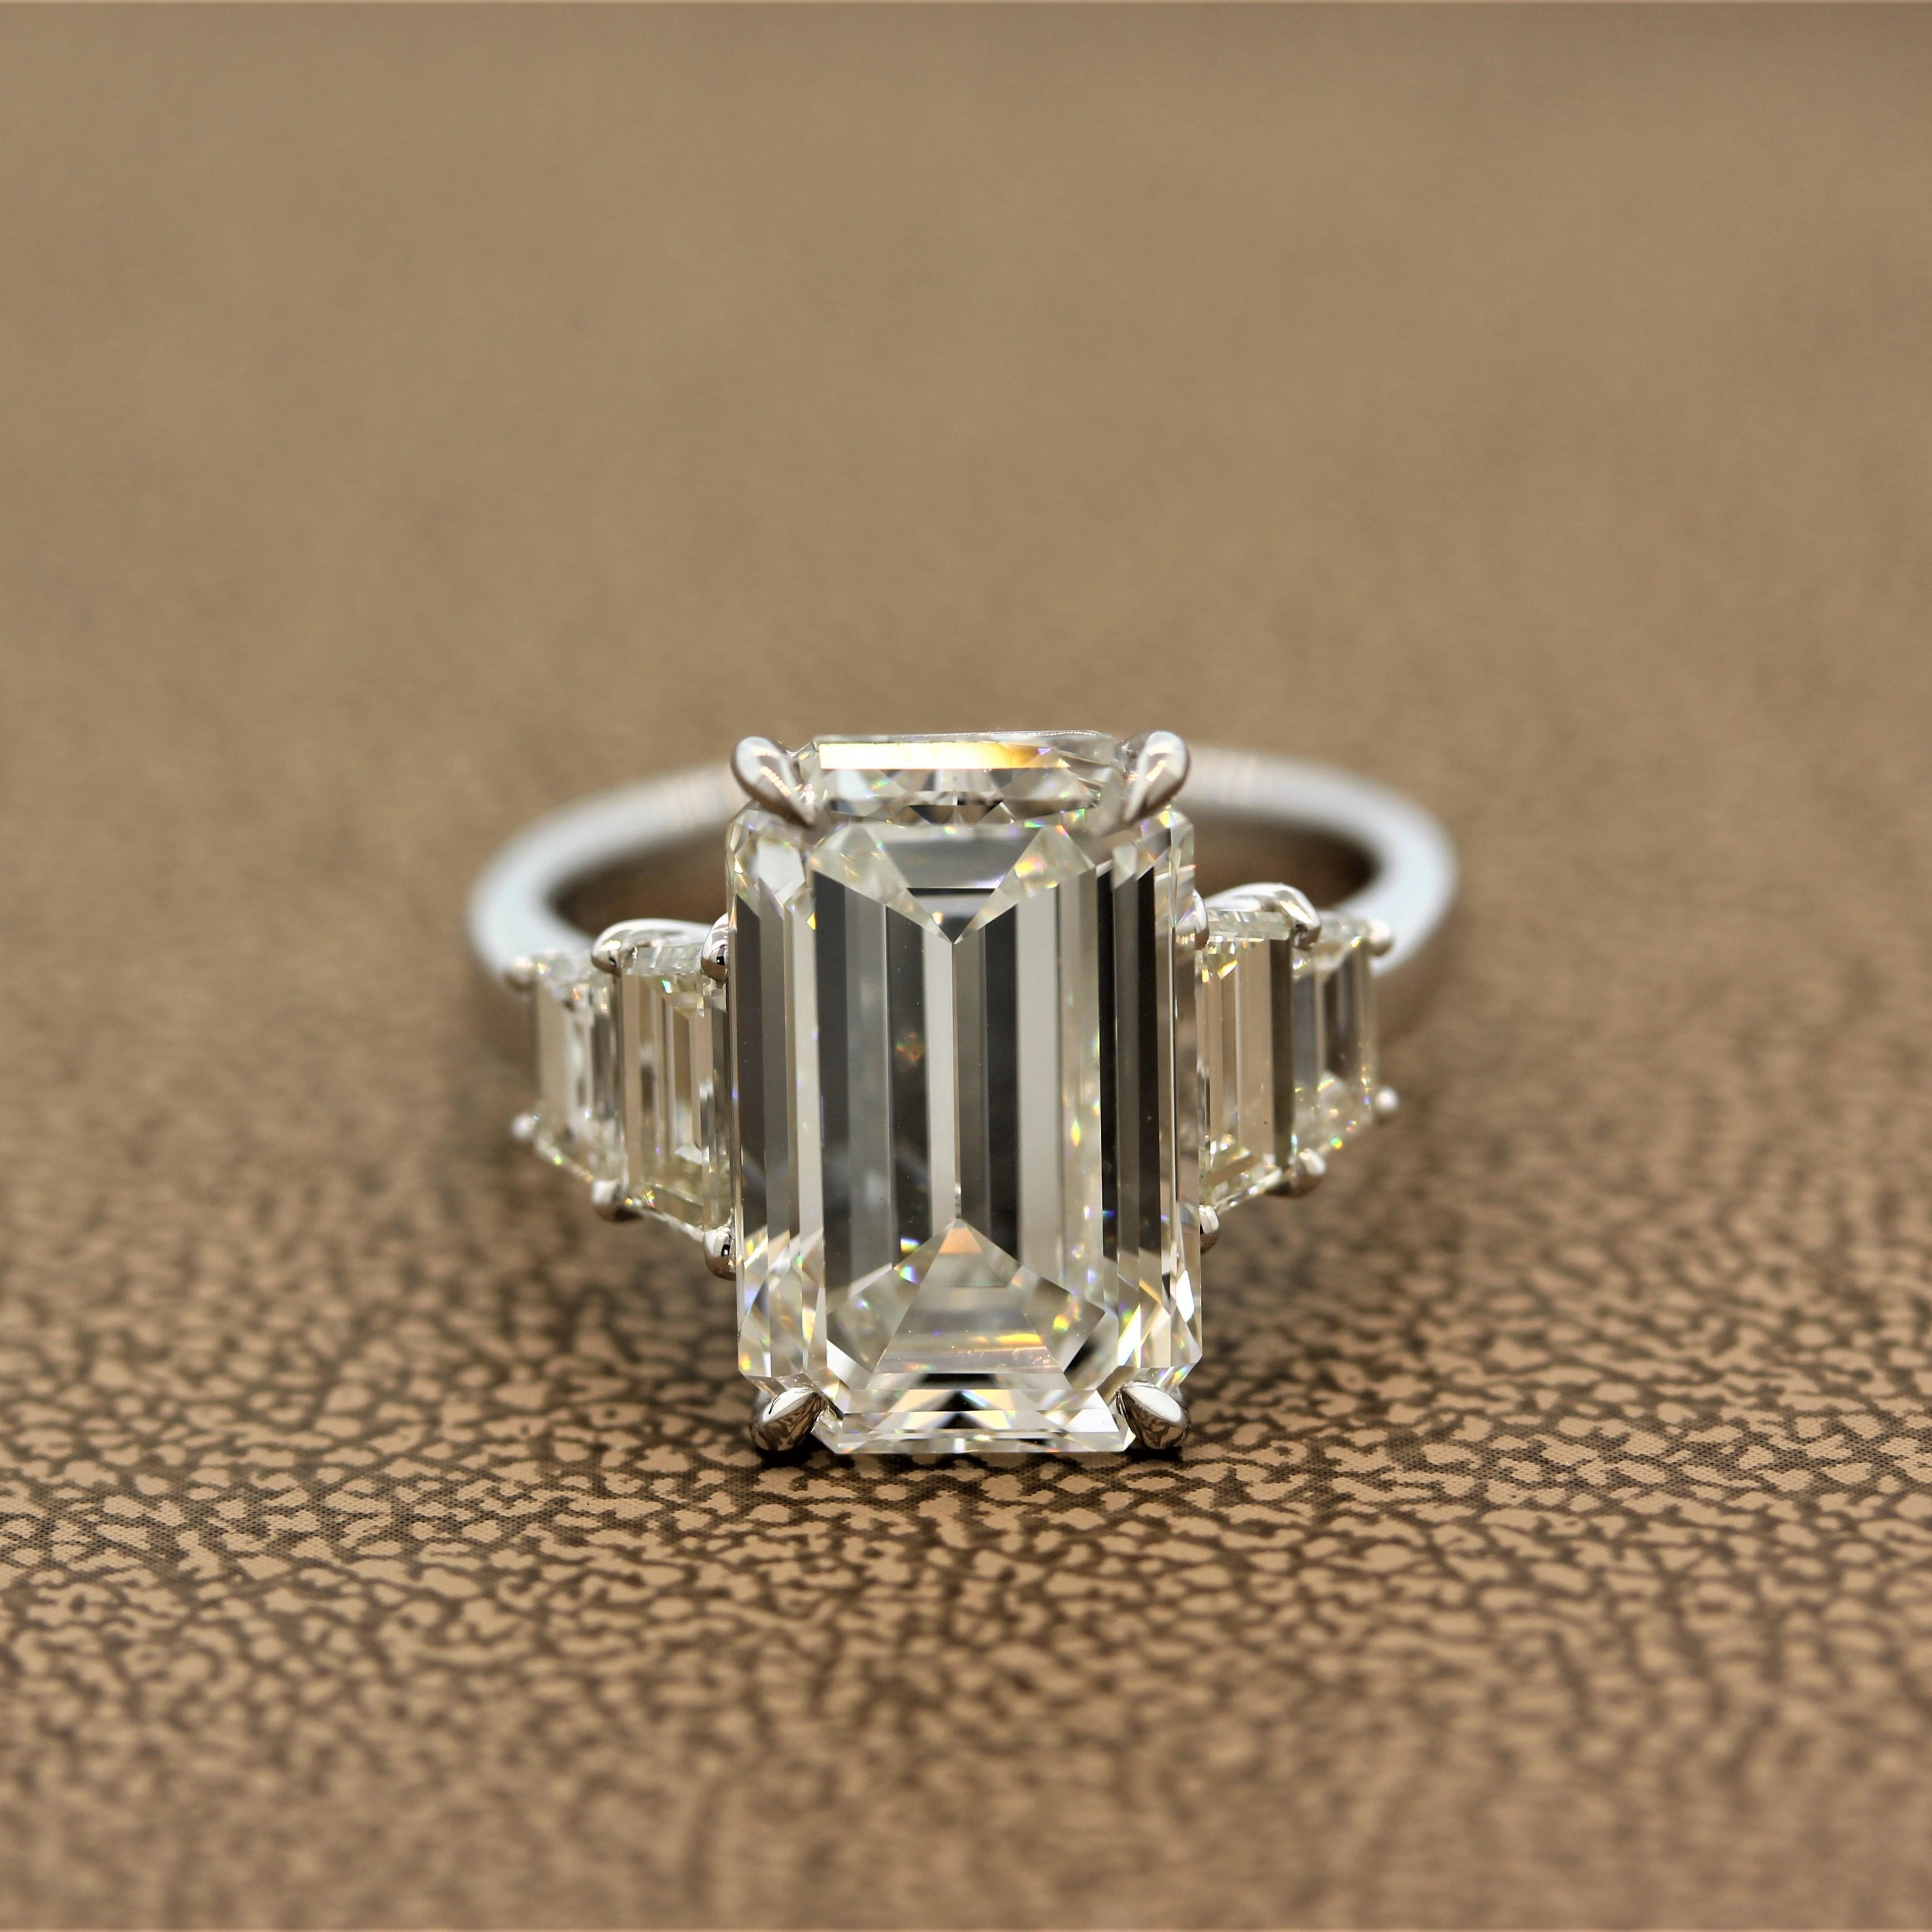 A chic and fashionable engagement ring featuring a 6.40 carat emerald cut diamond graded by the GIA as J color and VVS2 in clarity. We believe this rating to be harsh as in the faceup position this diamond looks 1-2 color grades better. Close to